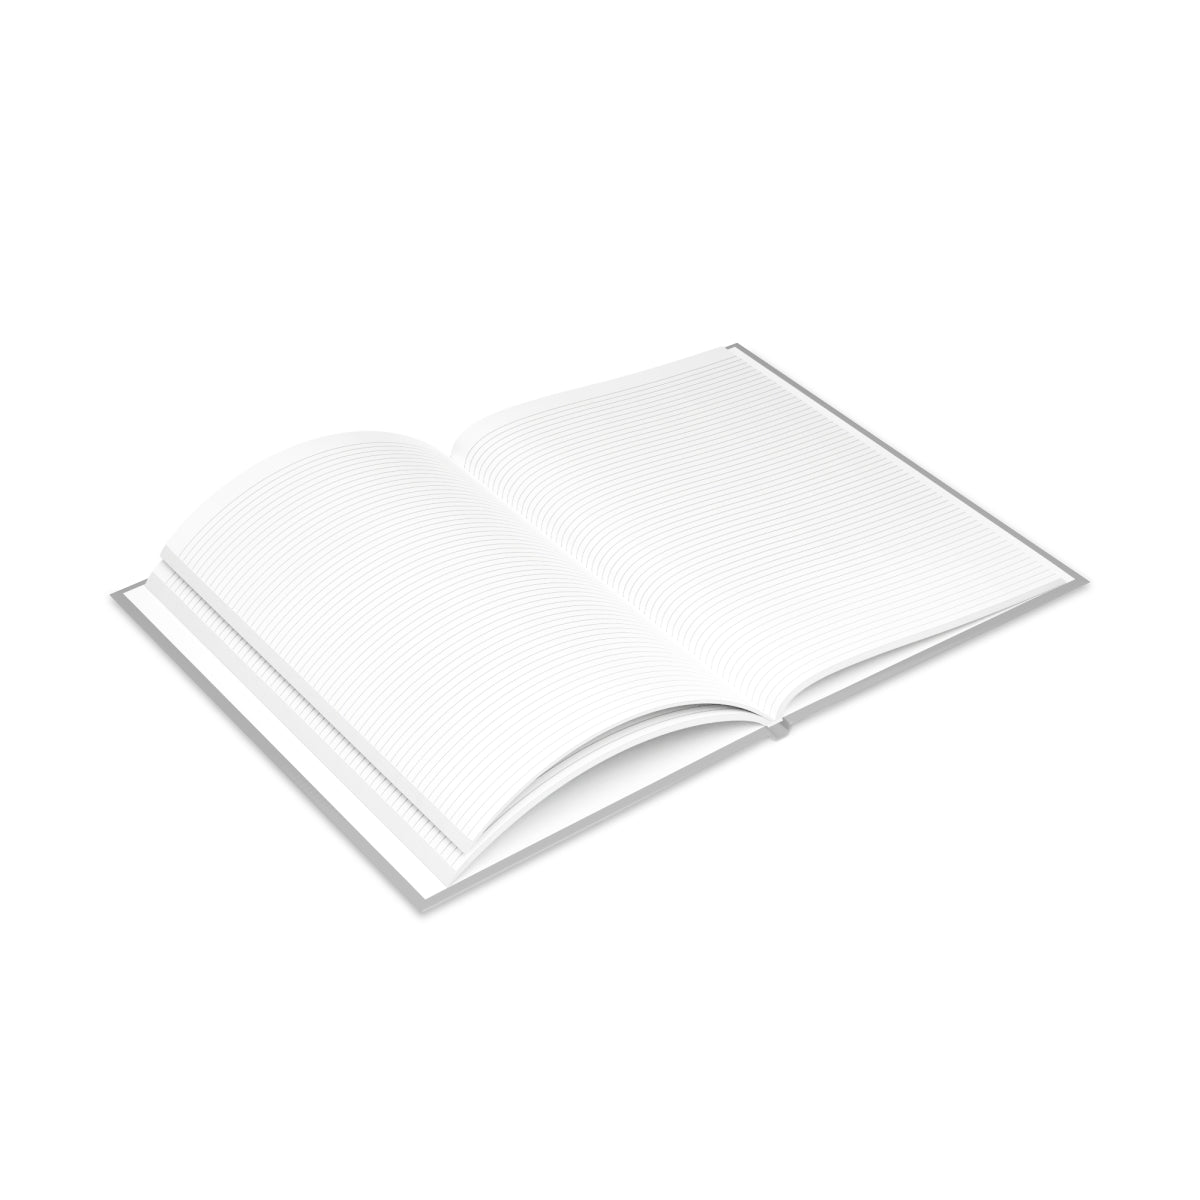 Wanted: Book Daddy - Hardcover Notebook with Puffy Covers